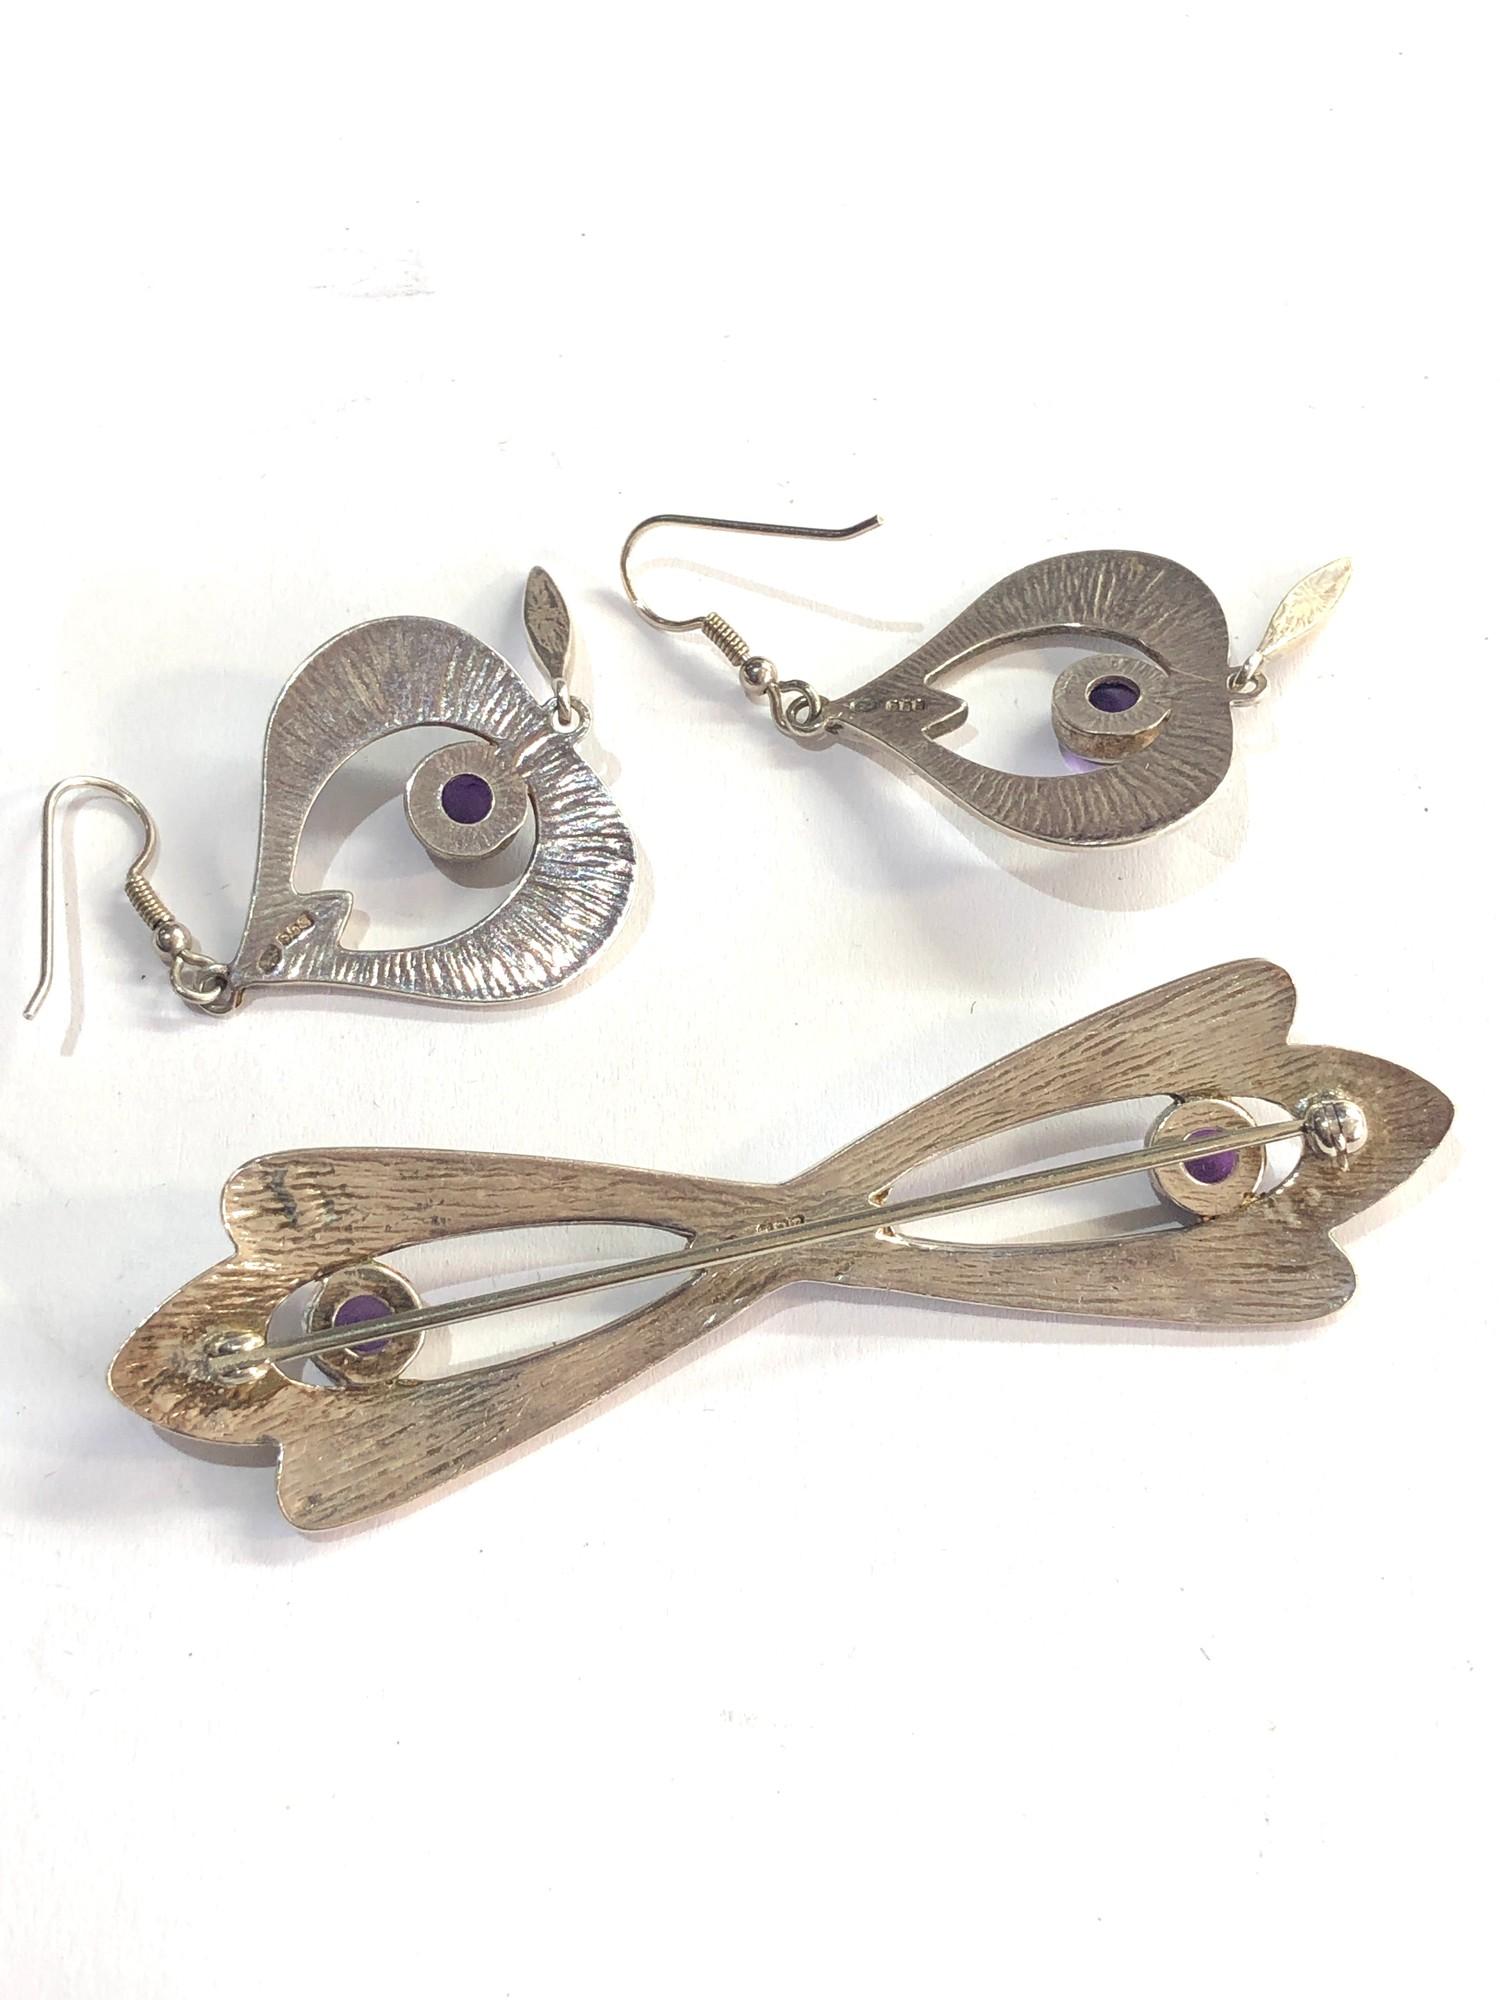 Silver and enamel amethyst set earrings and brooch - Image 3 of 3